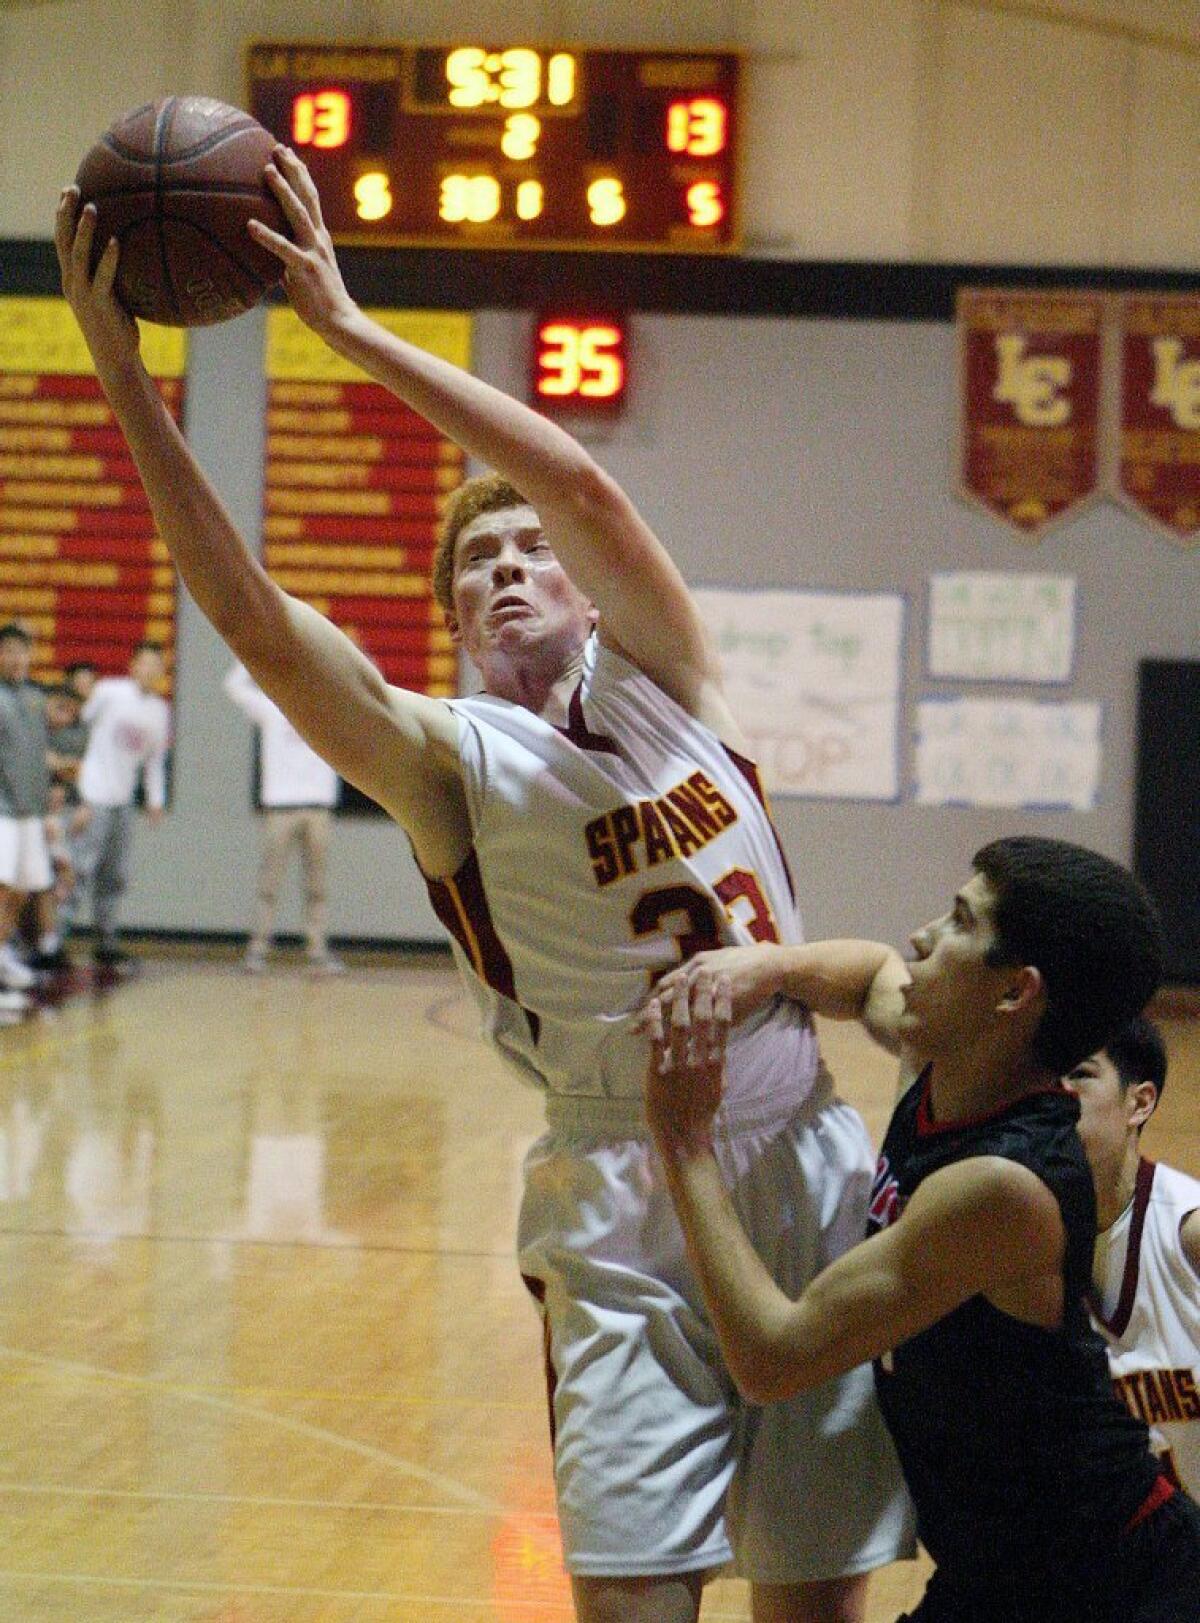 Ryan Graves and the La Canada High boys' basketball team defeated San Clemente on Friday night.